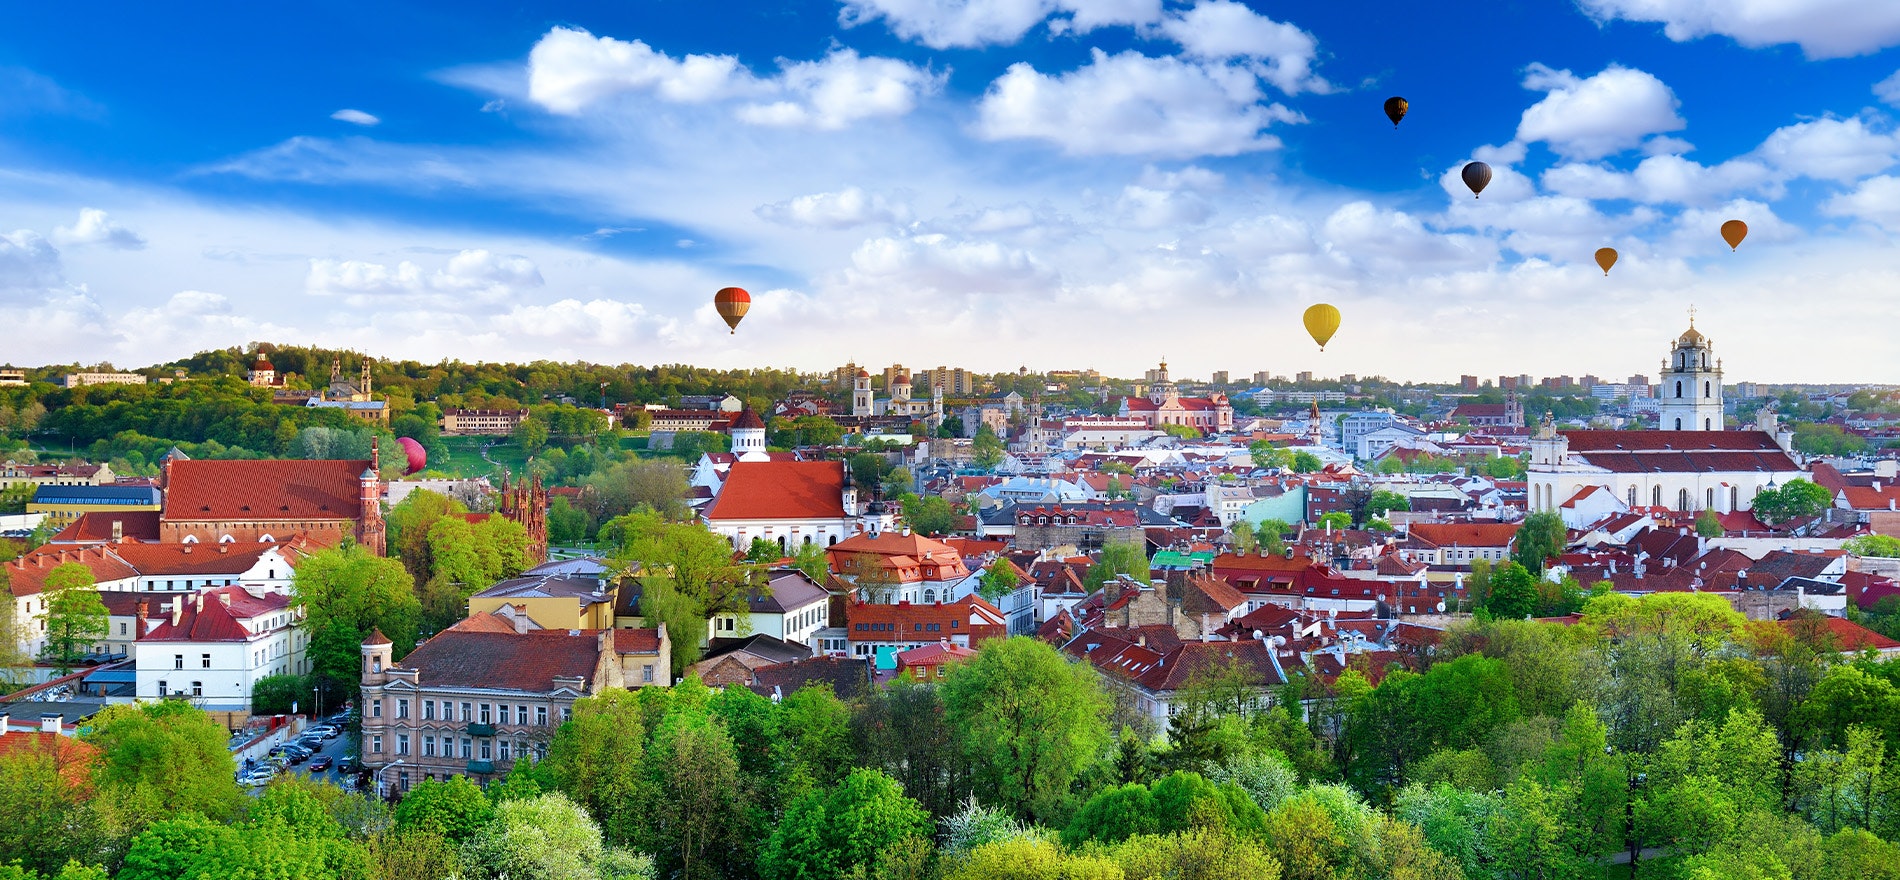 Colorful image of Vilnius with hot air balloons in the sky